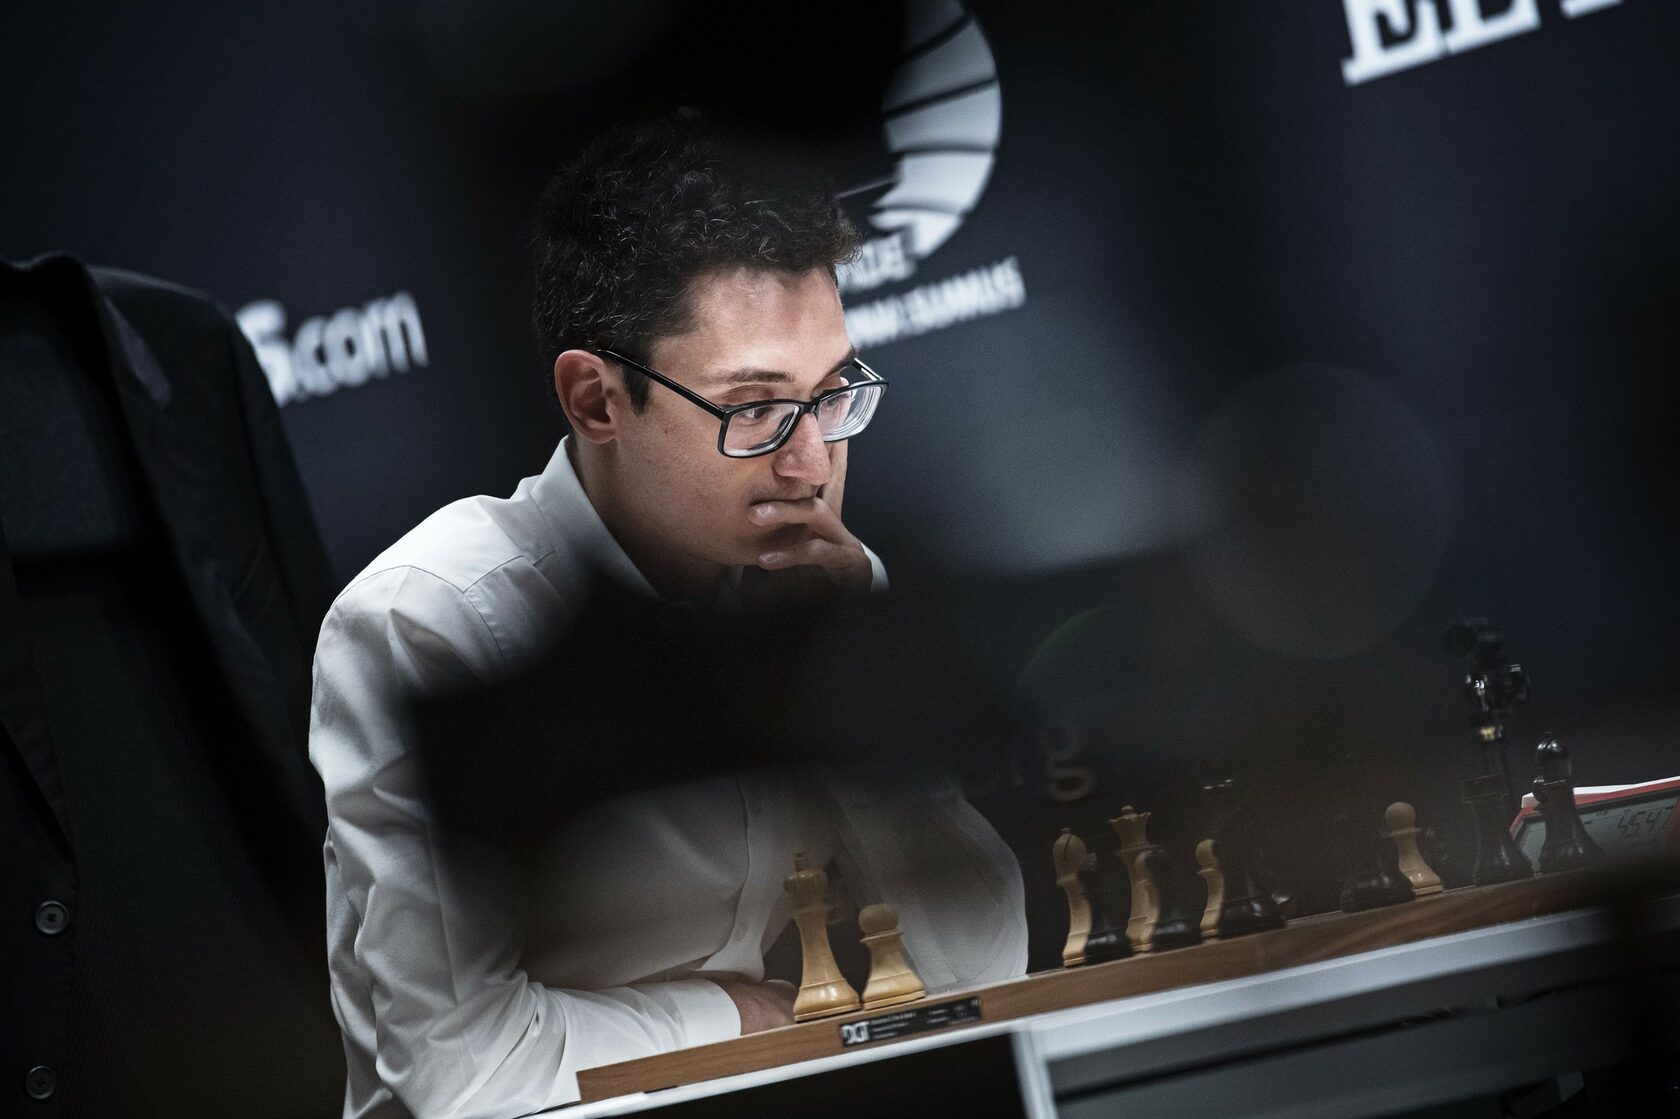 Ding beats Nakamura in the final round of the Candidates to finish in  second place